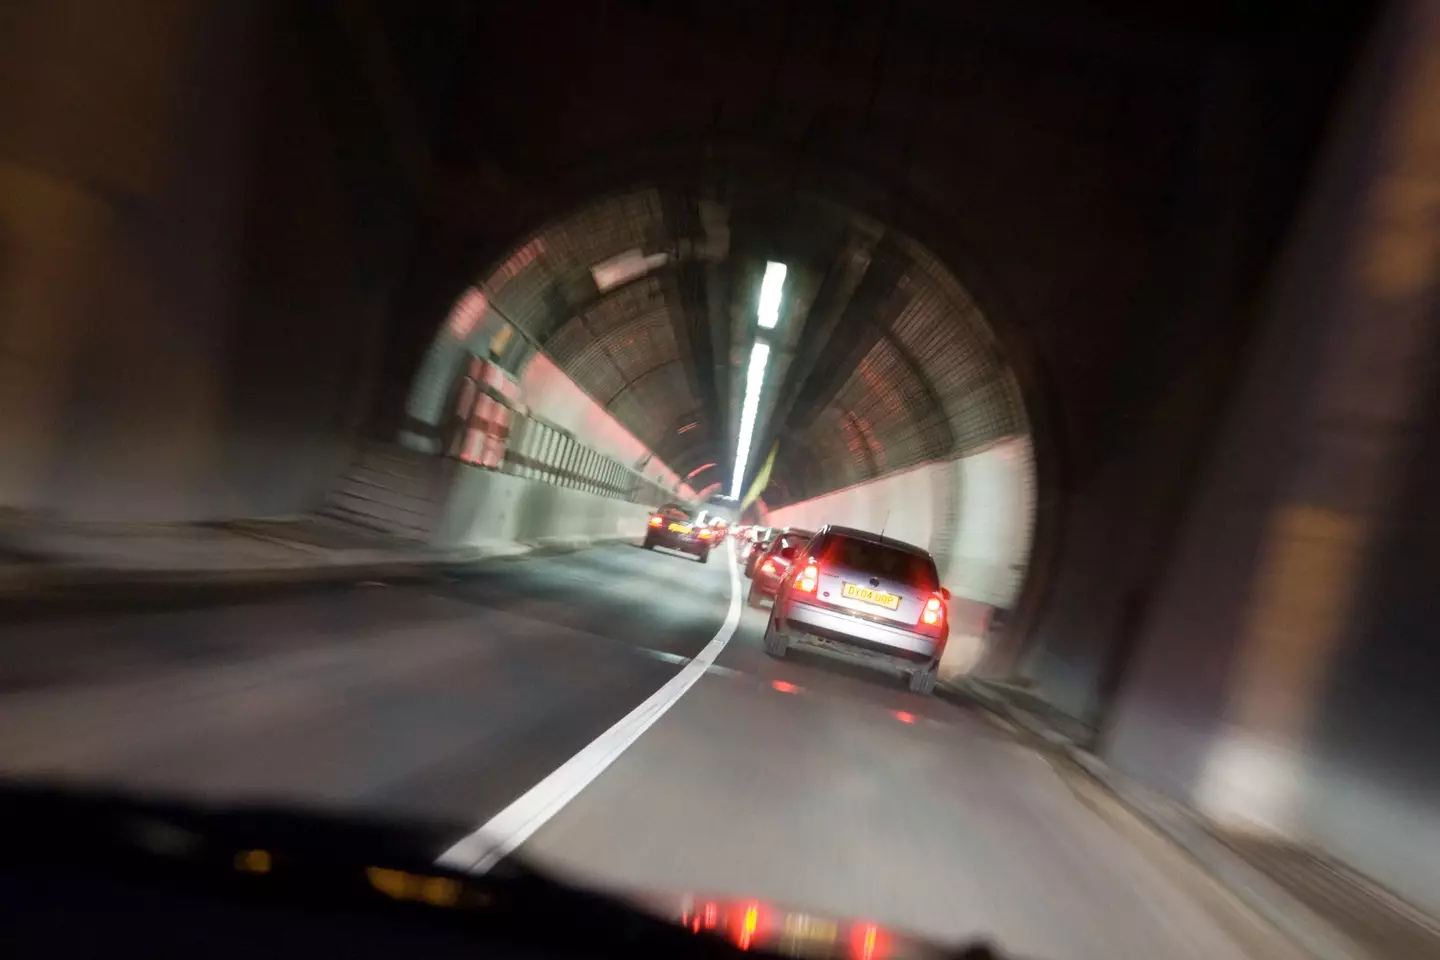 Jason lost control of the car coming out of Blackwall Tunnel.